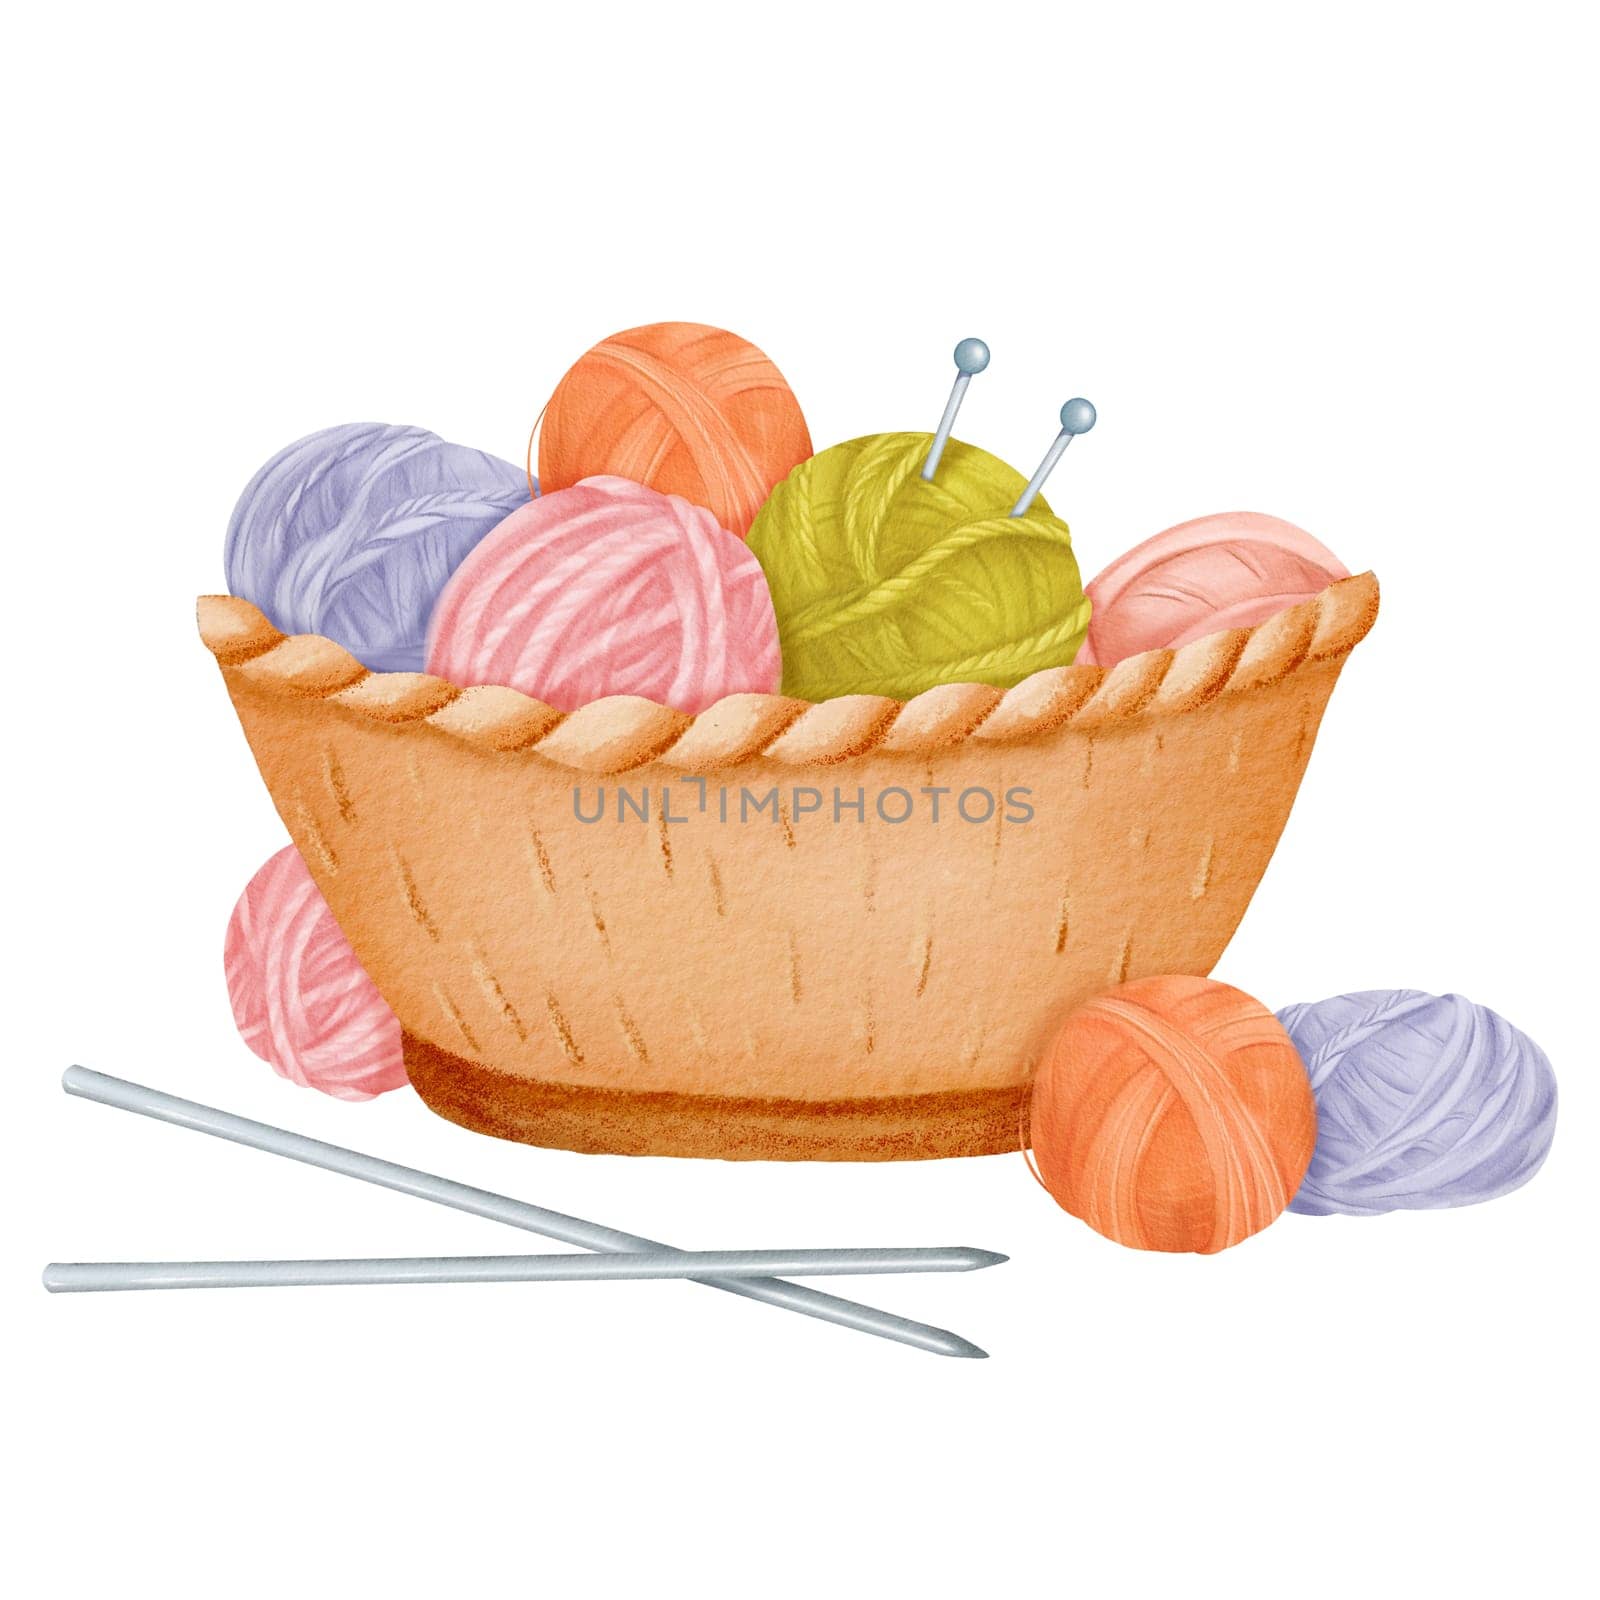 A comfortable setup featuring a woven basket filled with assorted yarn balls and knitting needles. for crafting websites, cozy home decor themes, or DIY-inspired designs. watercolor illustration by Art_Mari_Ka